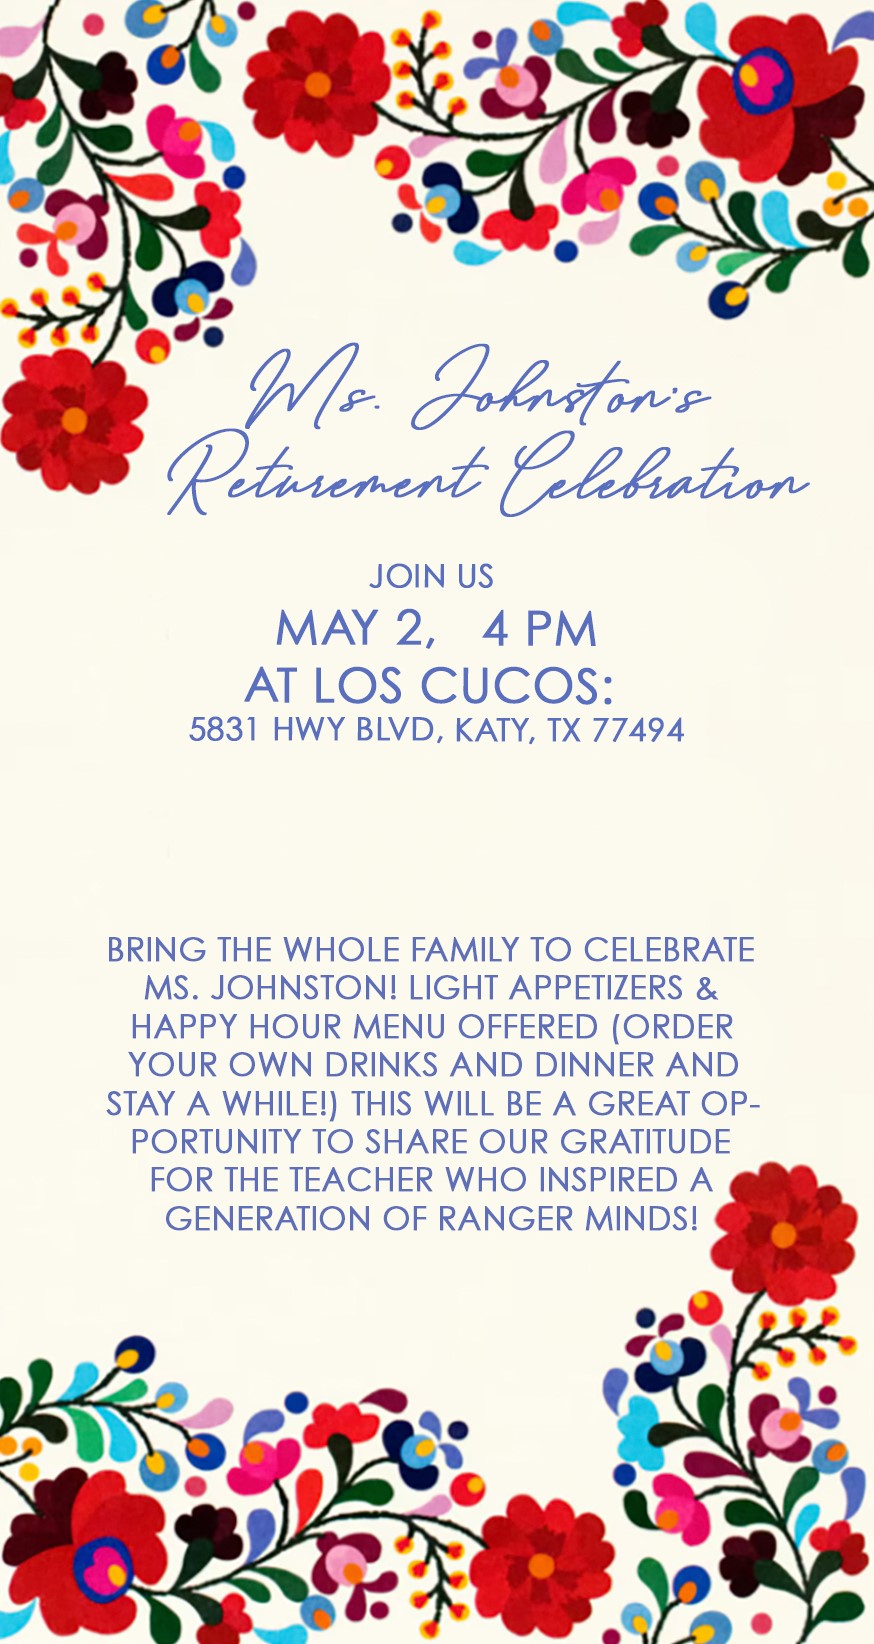 Invitation to Ms. Johnston's Party